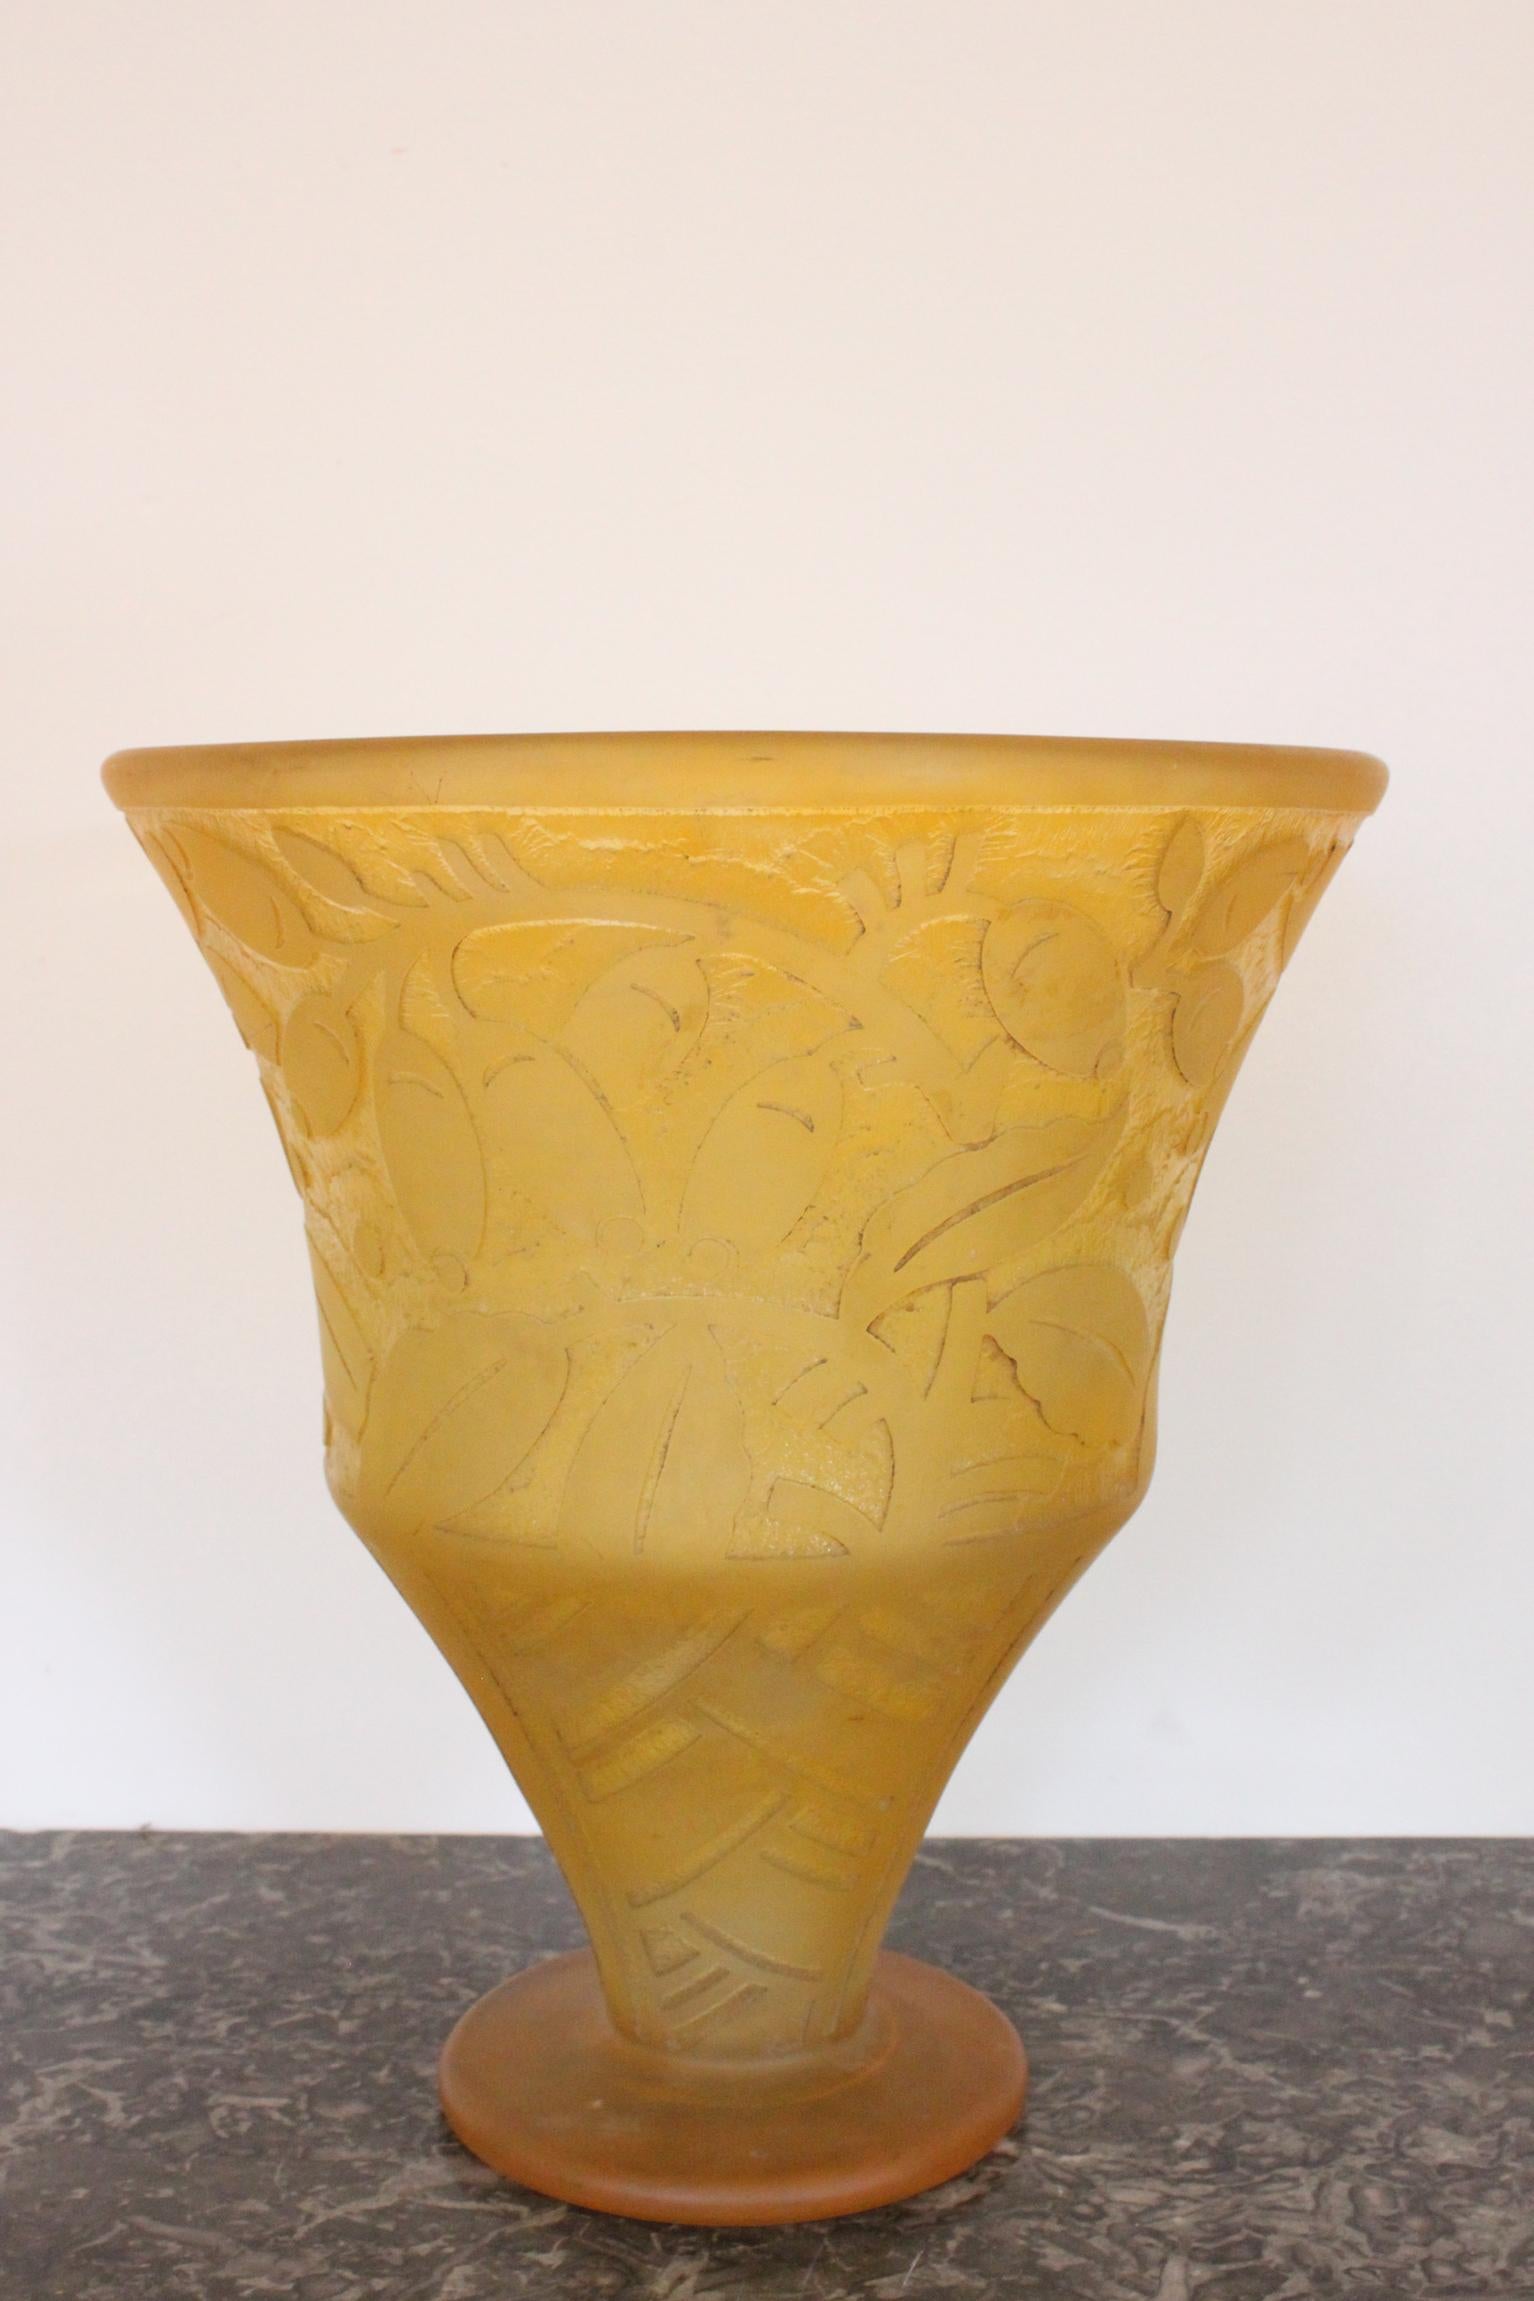 Daum vase with floral pattern, 1930 period guaranteed. Yellow color. In perfect condition and signed “Daum Nancy France